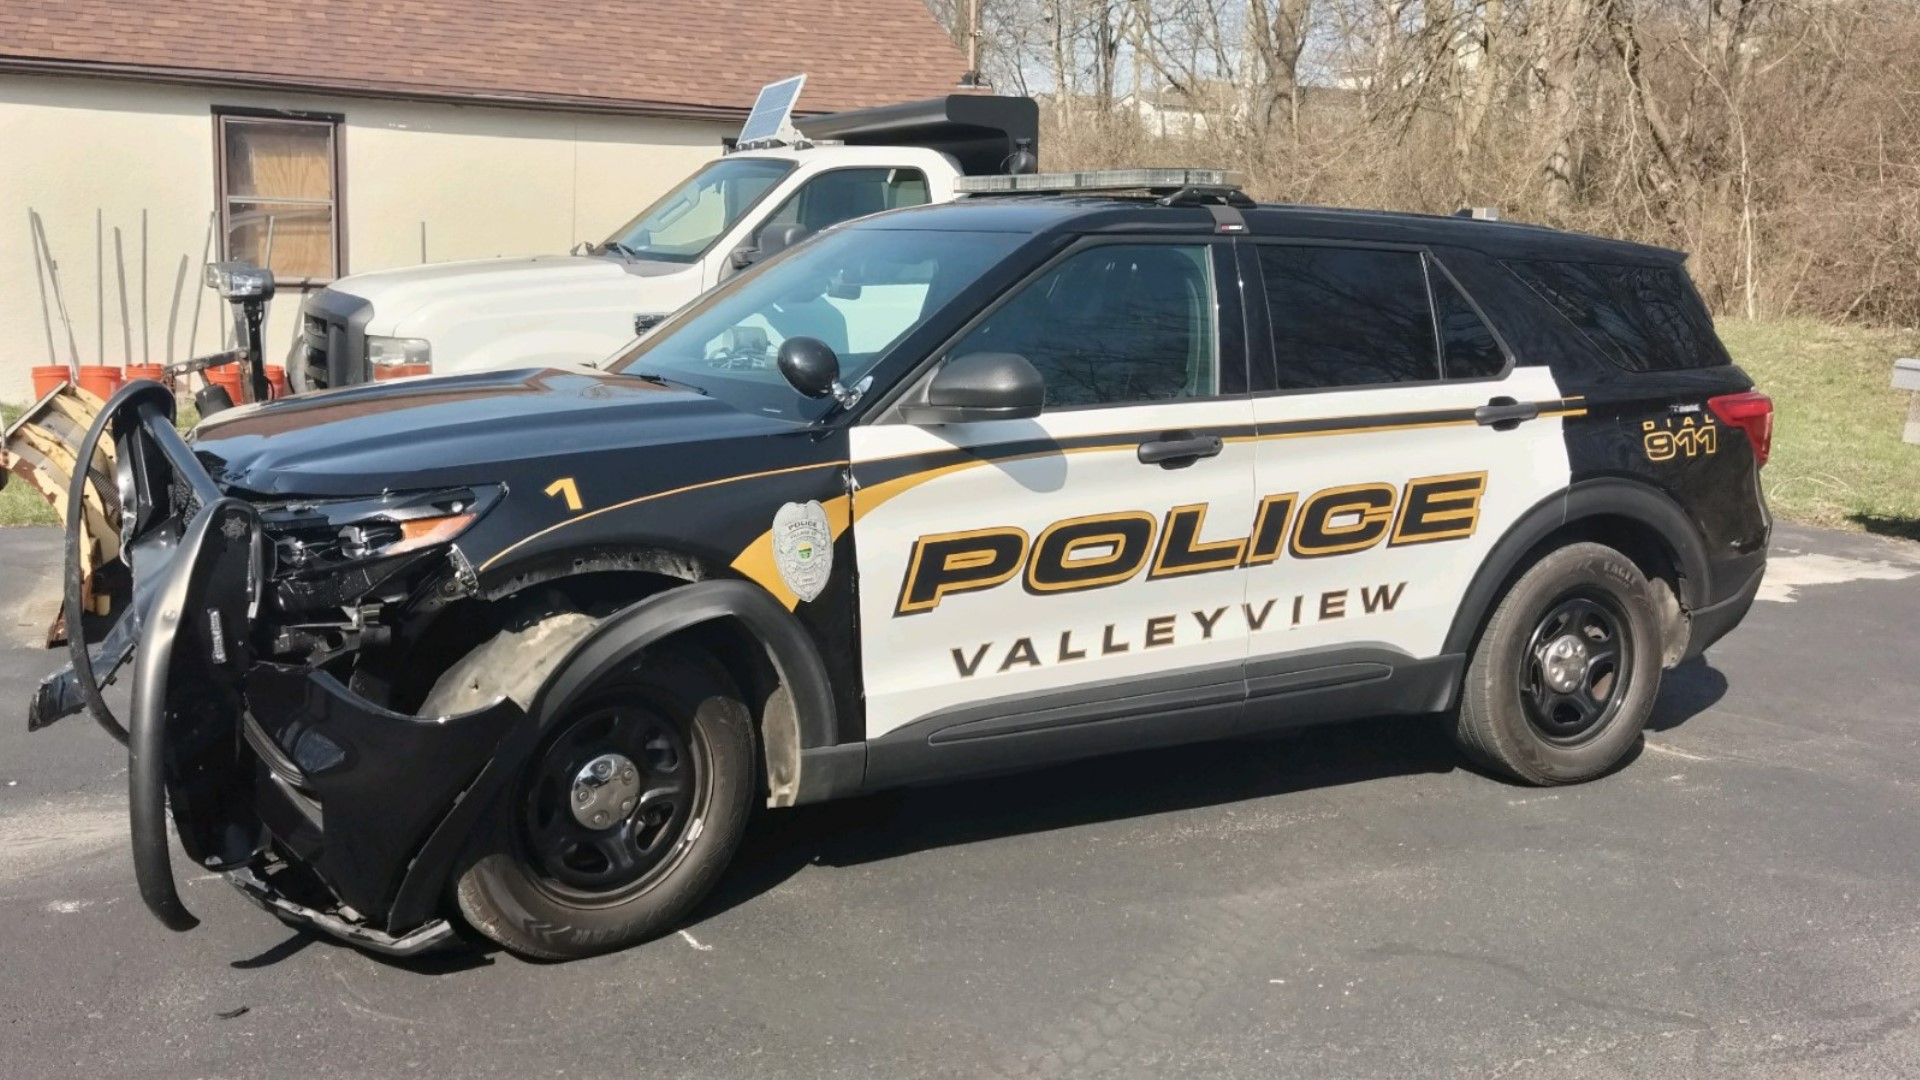 The police chief for the Village of Valleyview was involved in a crash with another vehicle near west Columbus Tuesday evening.